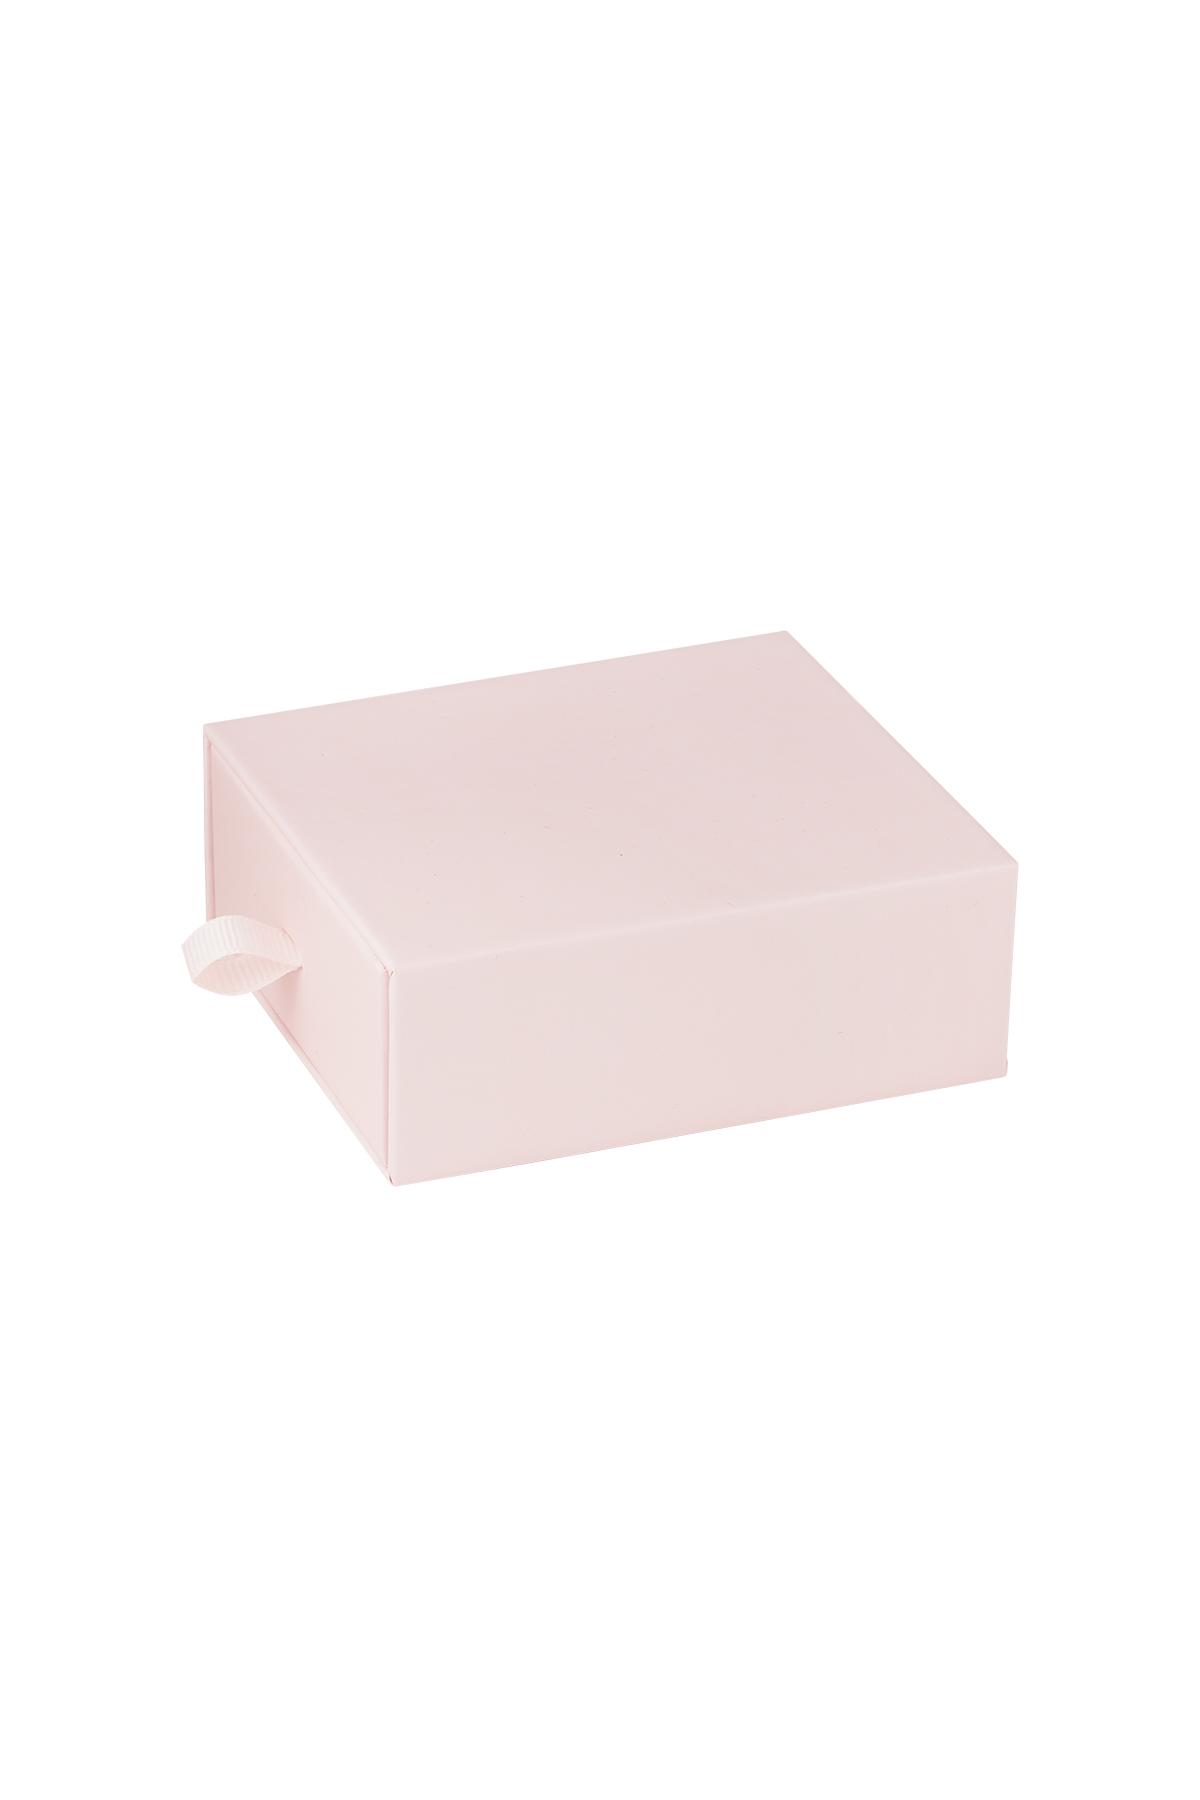 Extendable jewelry box Pink Paper h5 